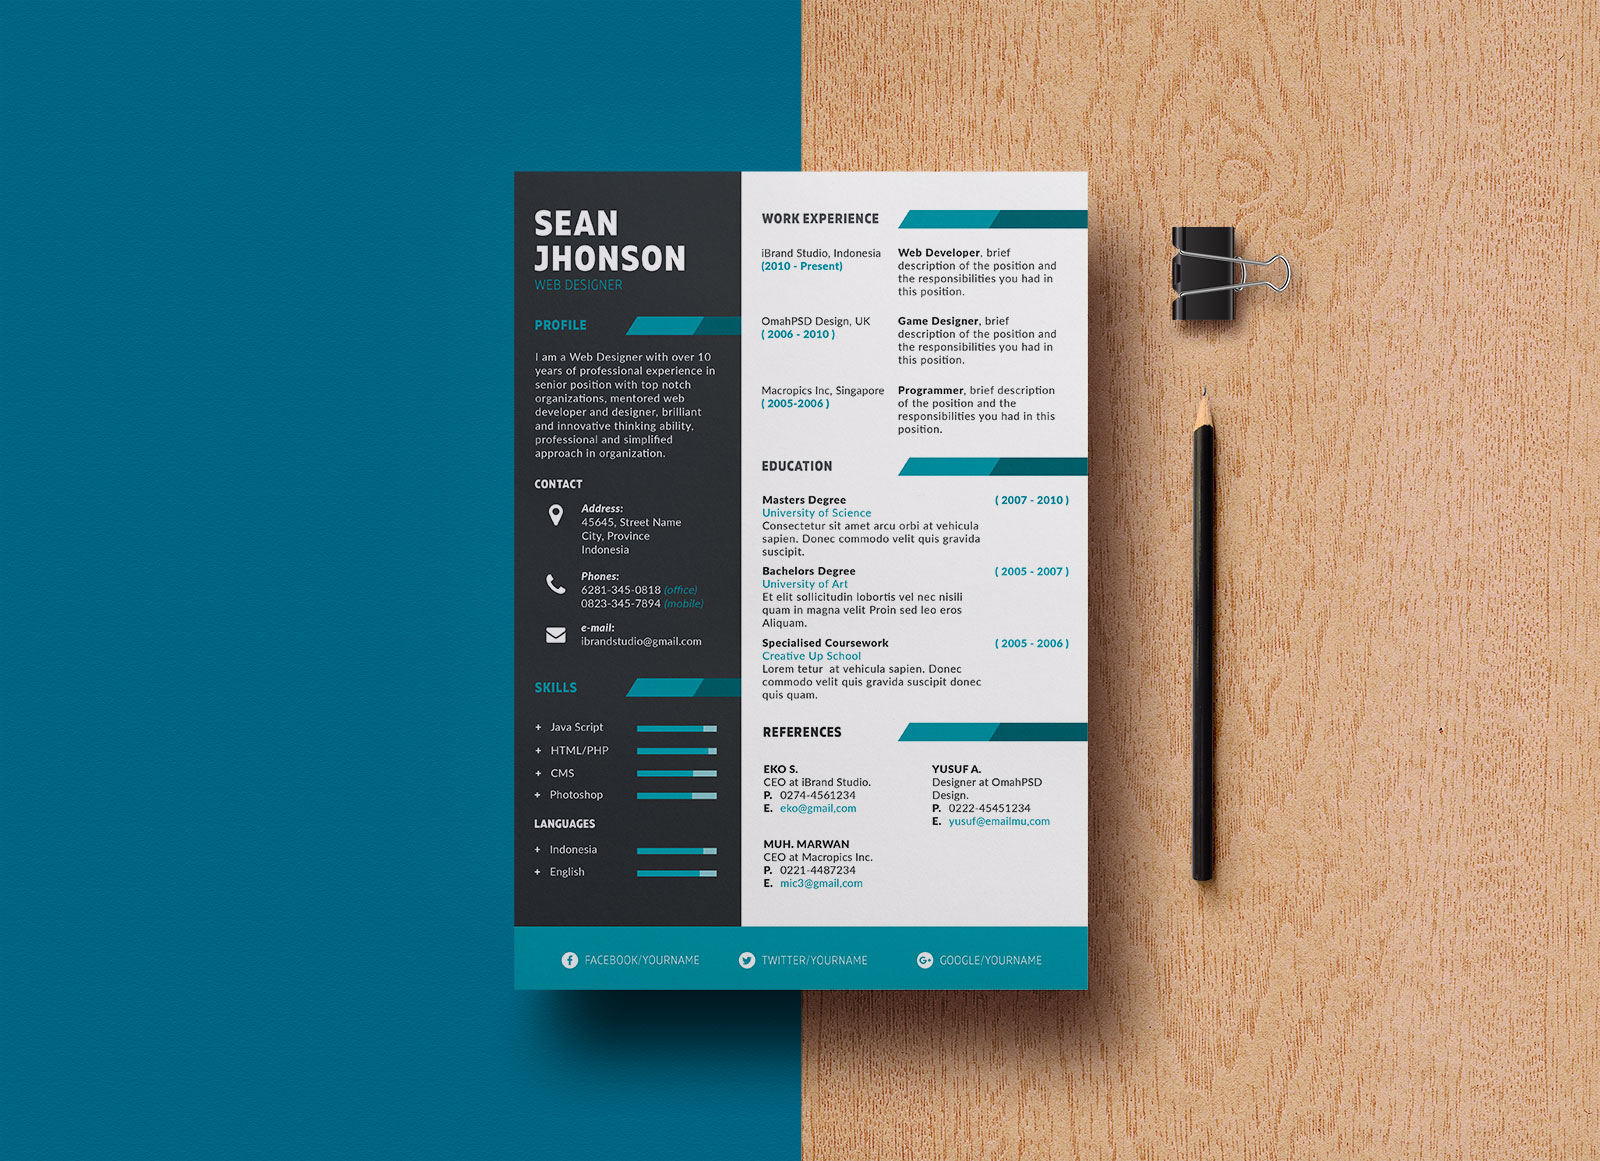 Photoshop Resume Template from good-resume.com